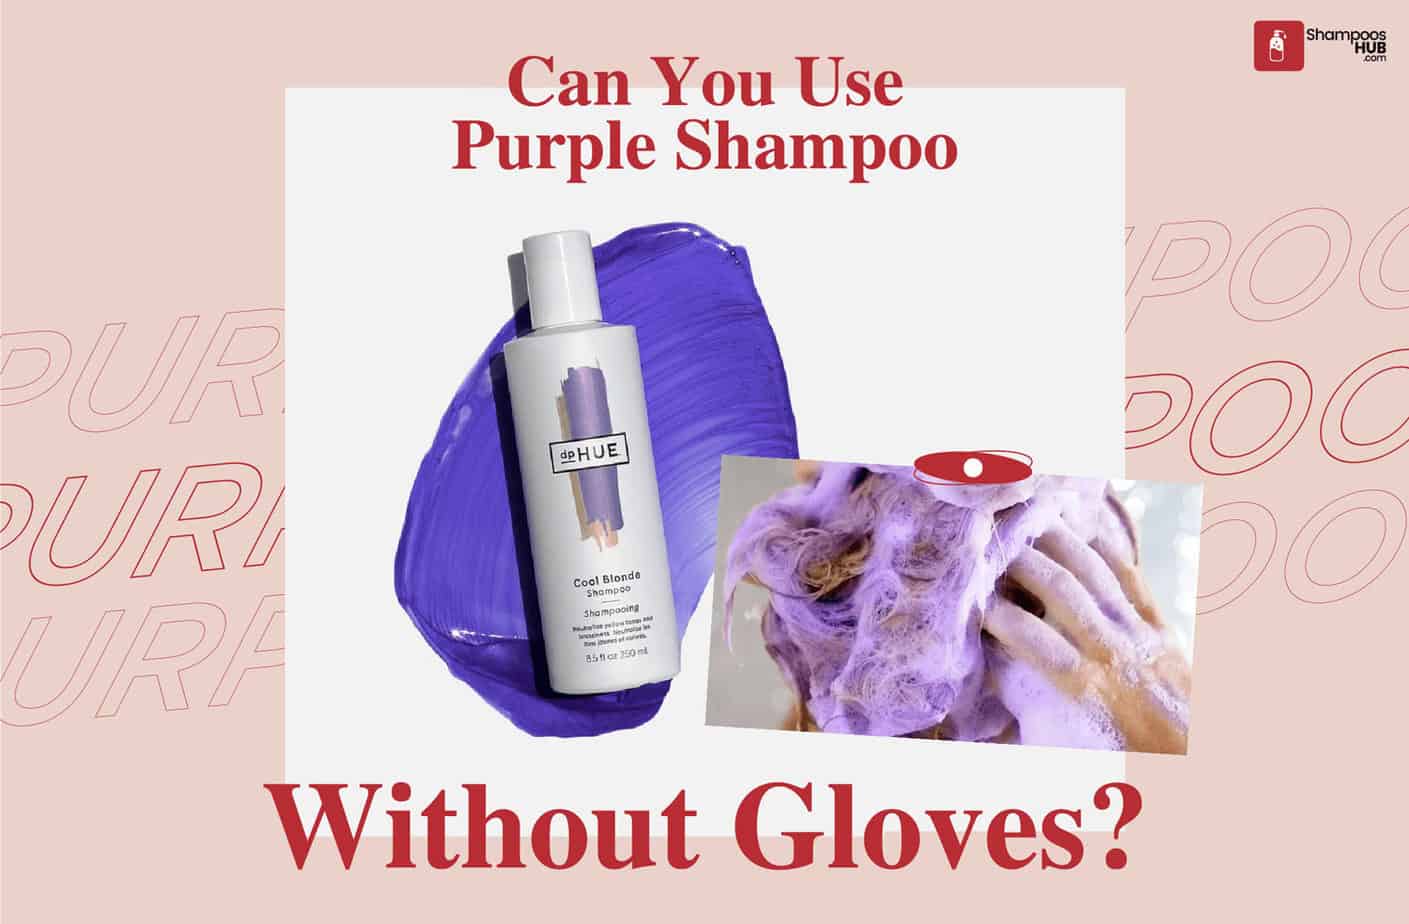 Can You Use Purple Shampoo Without Gloves?